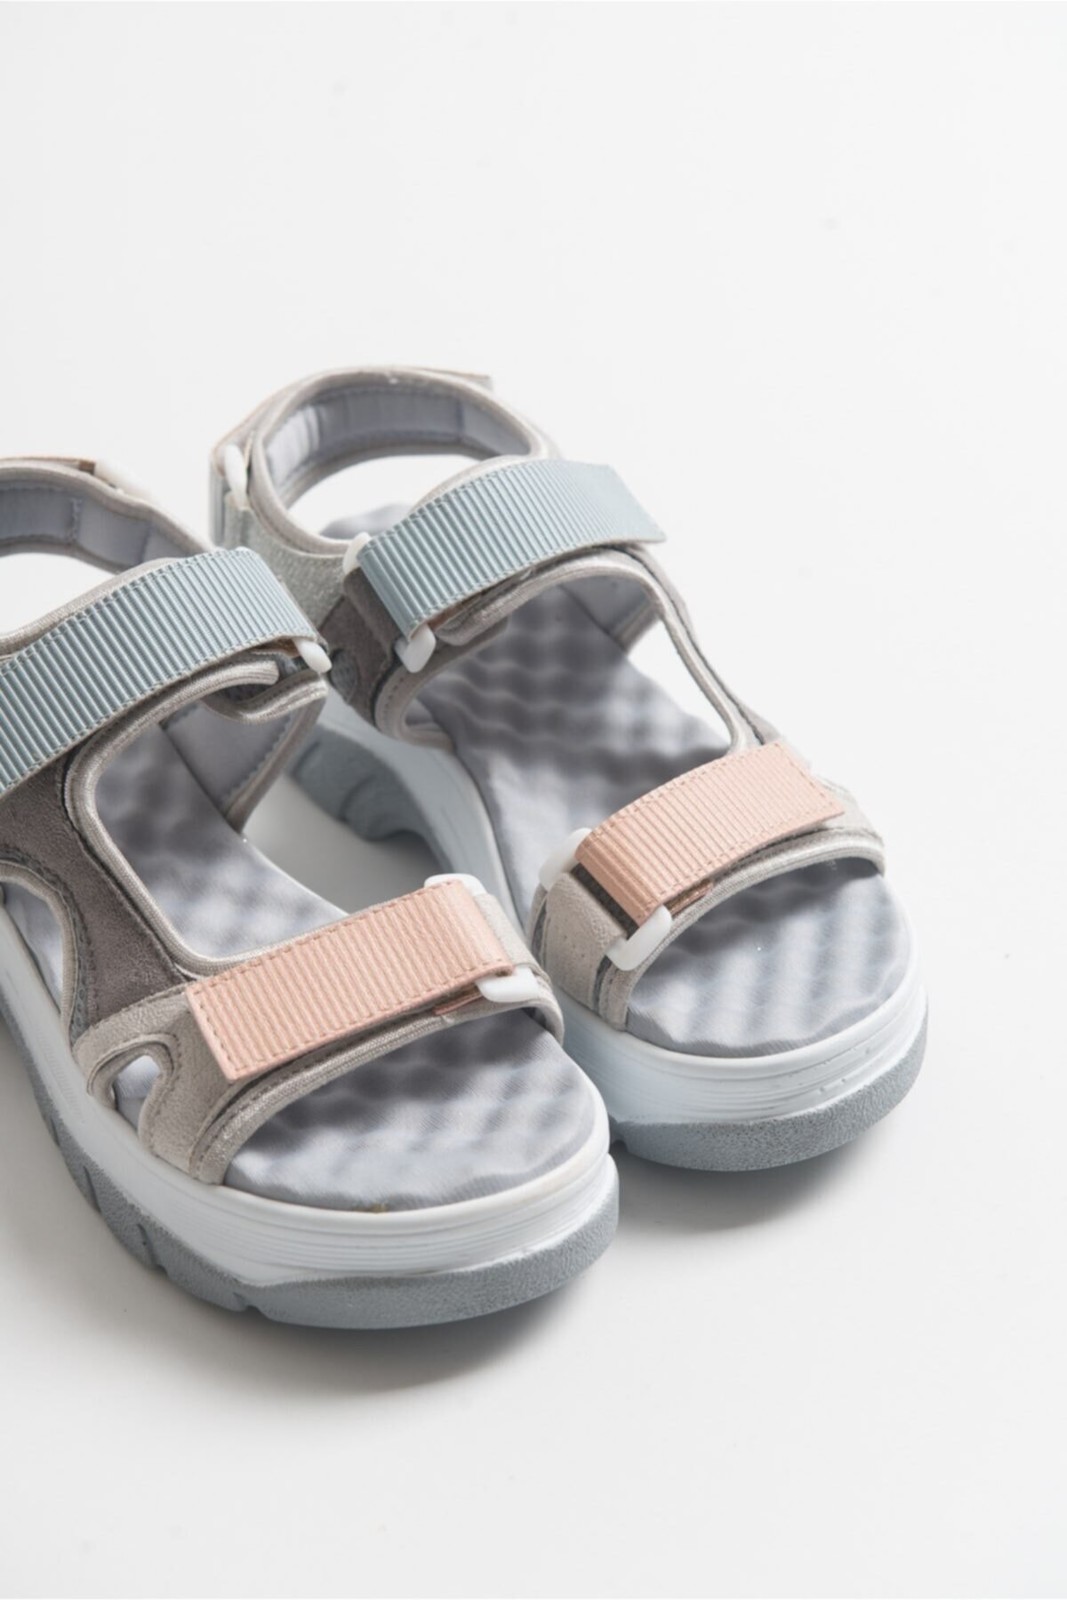 LuviShoes Women's Ice Blue Banded Sandals